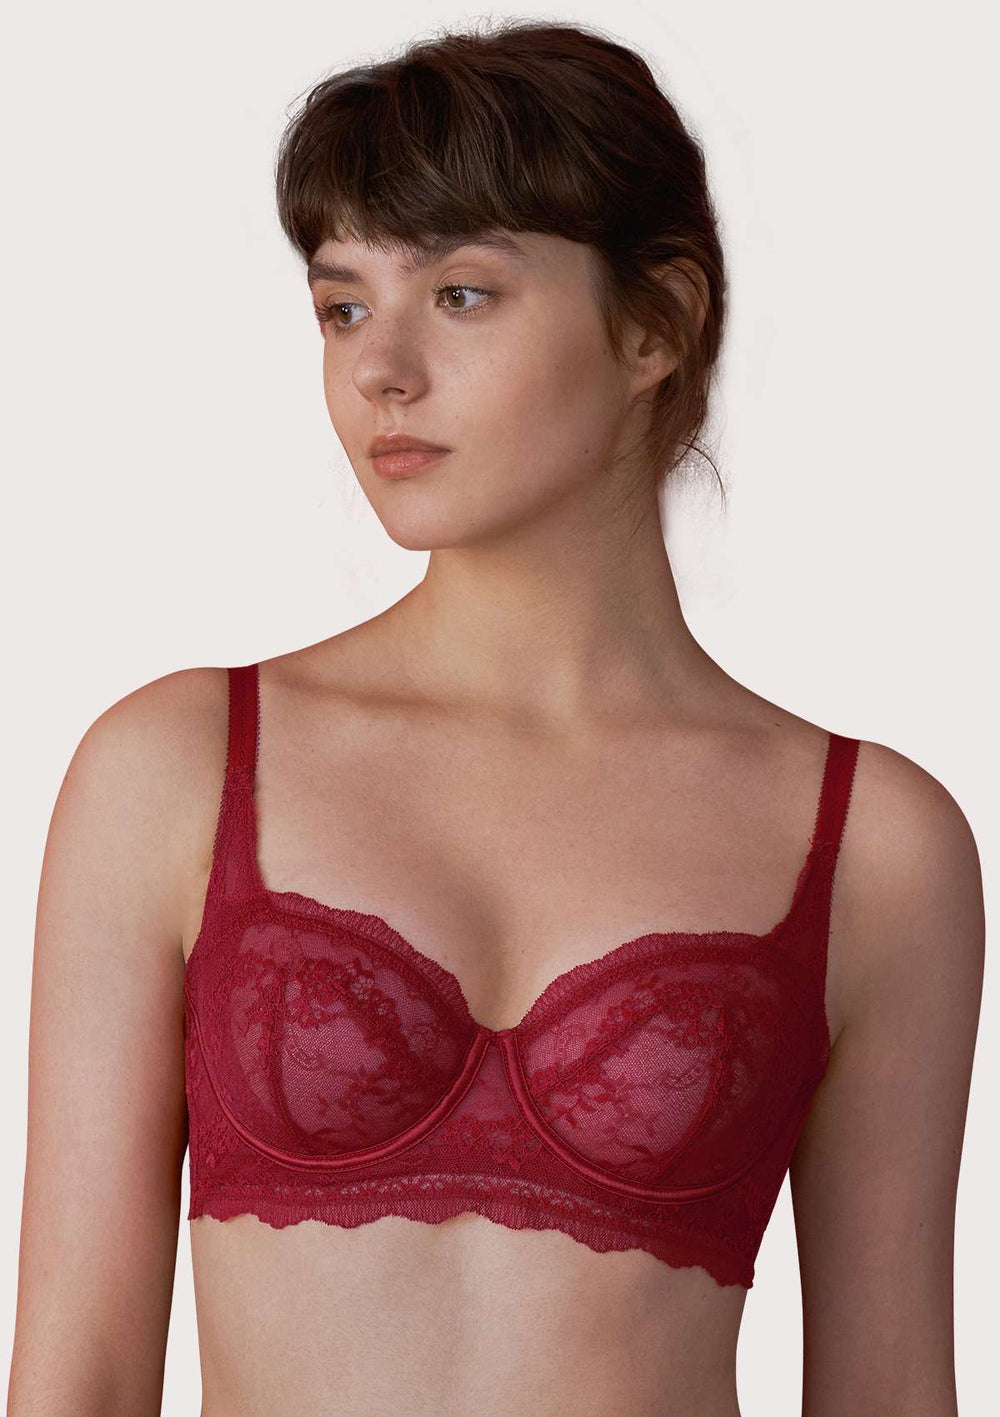 Kiss Lace Wirefree Floral Bra 46C Maroon Red White